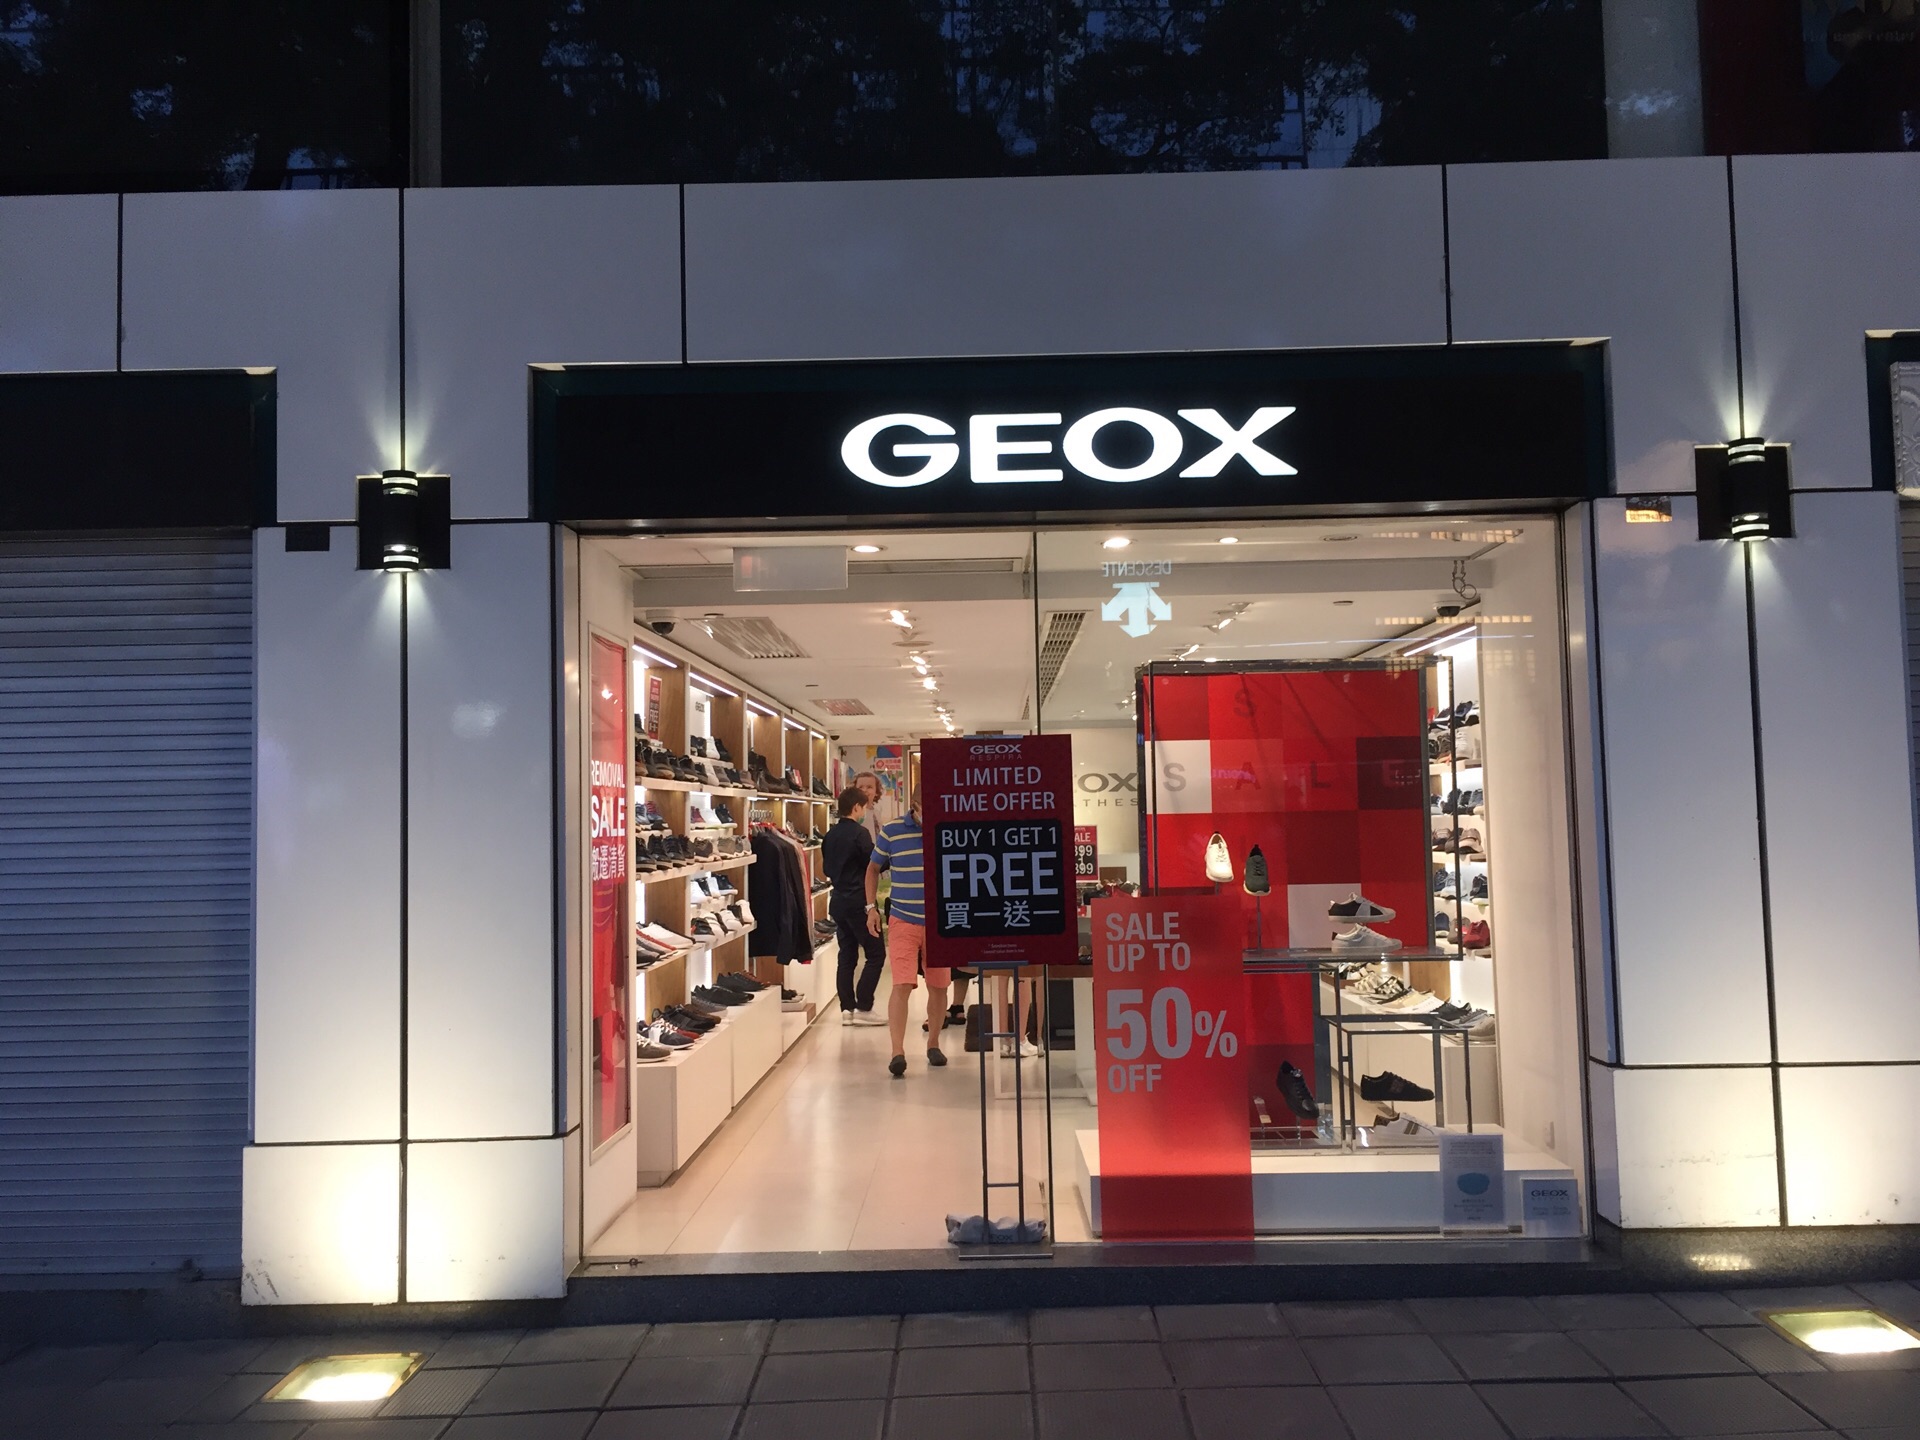 GEOX(栢麗購物大道店) travel guidebook –must visit attractions in Hong Kong – GEOX(栢麗購物大道店)  nearby recommendation – Trip.com